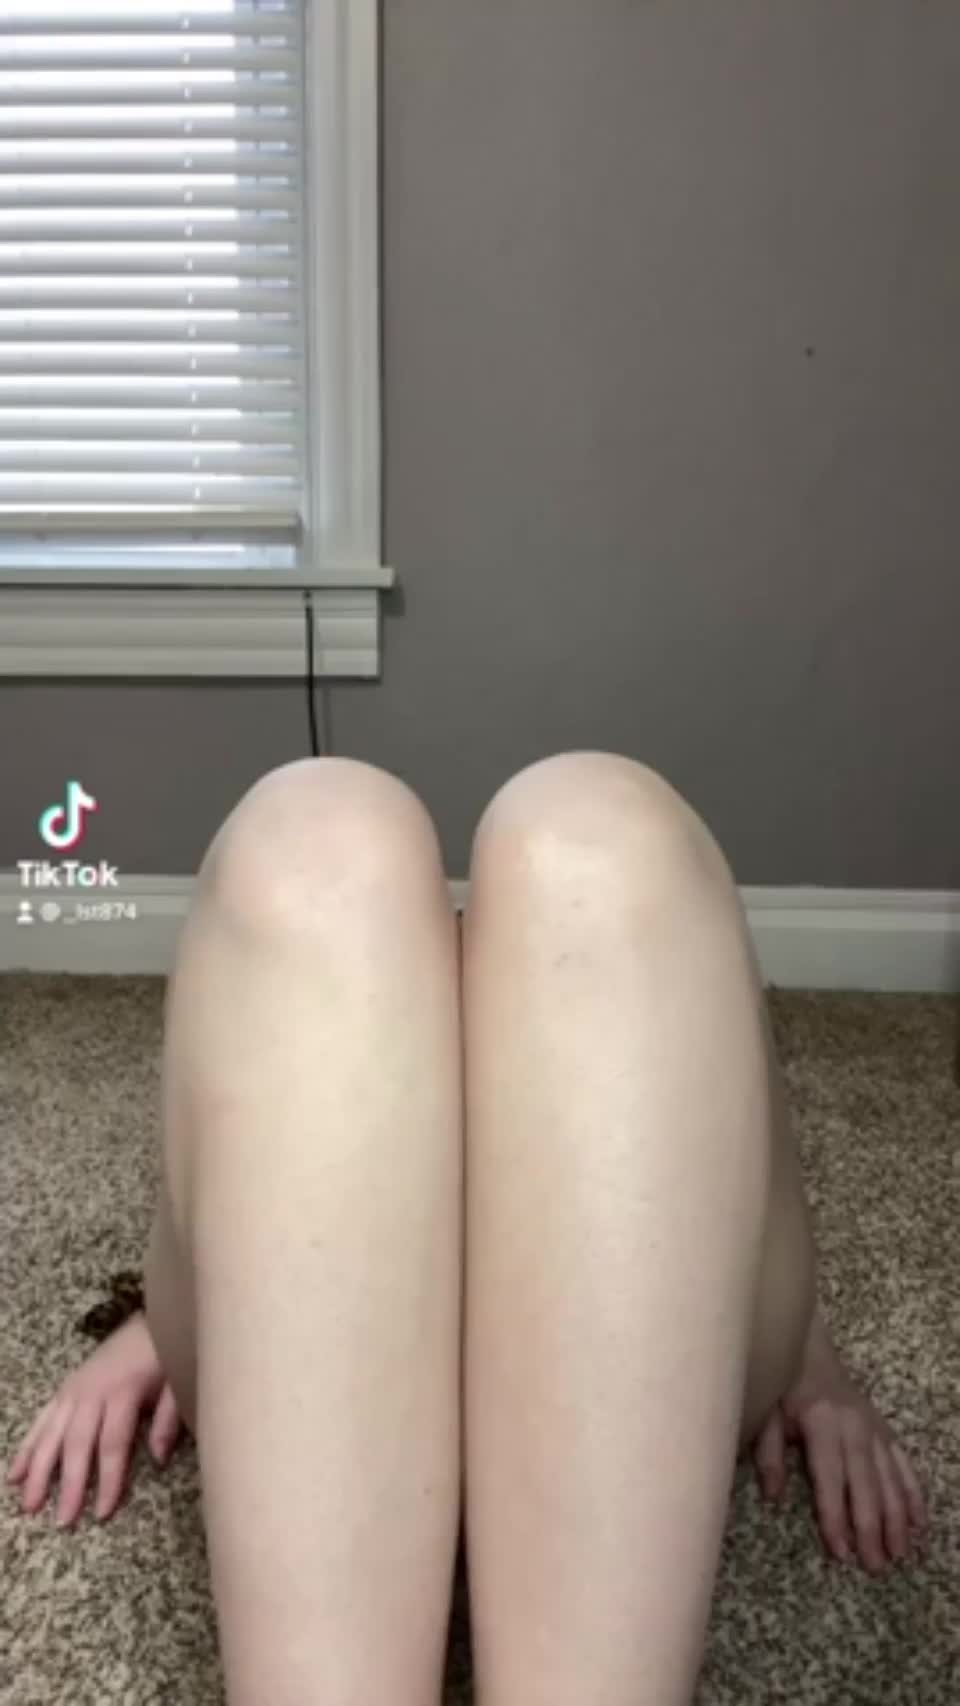 Video by HamzaCybaer with the username @HamzaCybaer,  February 27, 2021 at 2:44 PM. The post is about the topic TikTok and the text says 'Who knew sit-ups could be so … - View nude pics and porn videos from @lst_874'